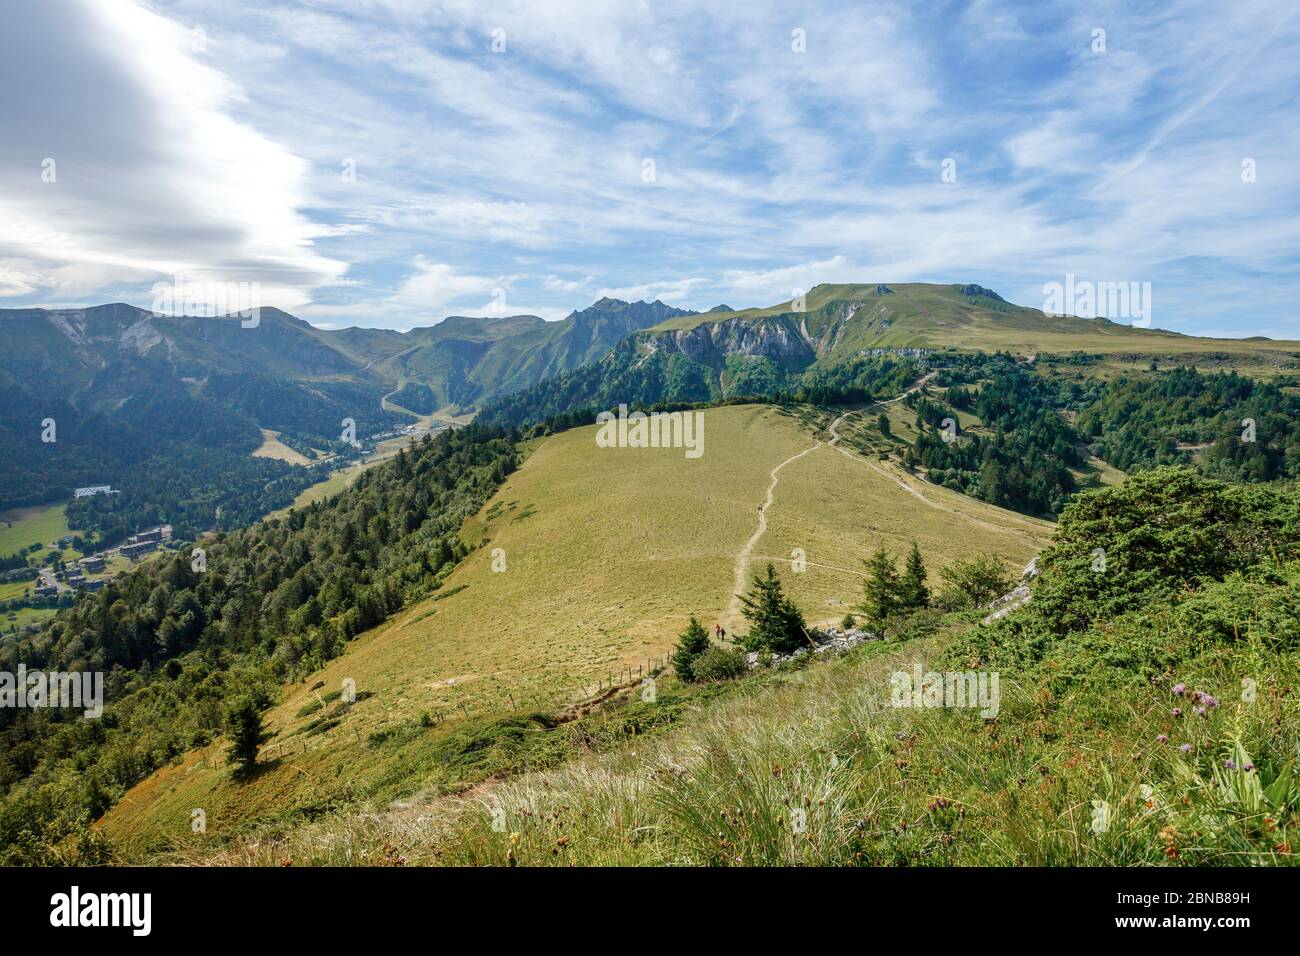 France, Puy de Dome, Volcans d’Auvergne Regional Natural Park, Mont Dore, view from the top of Le Capuchin with the Puy de Sancy in the background // Stock Photo